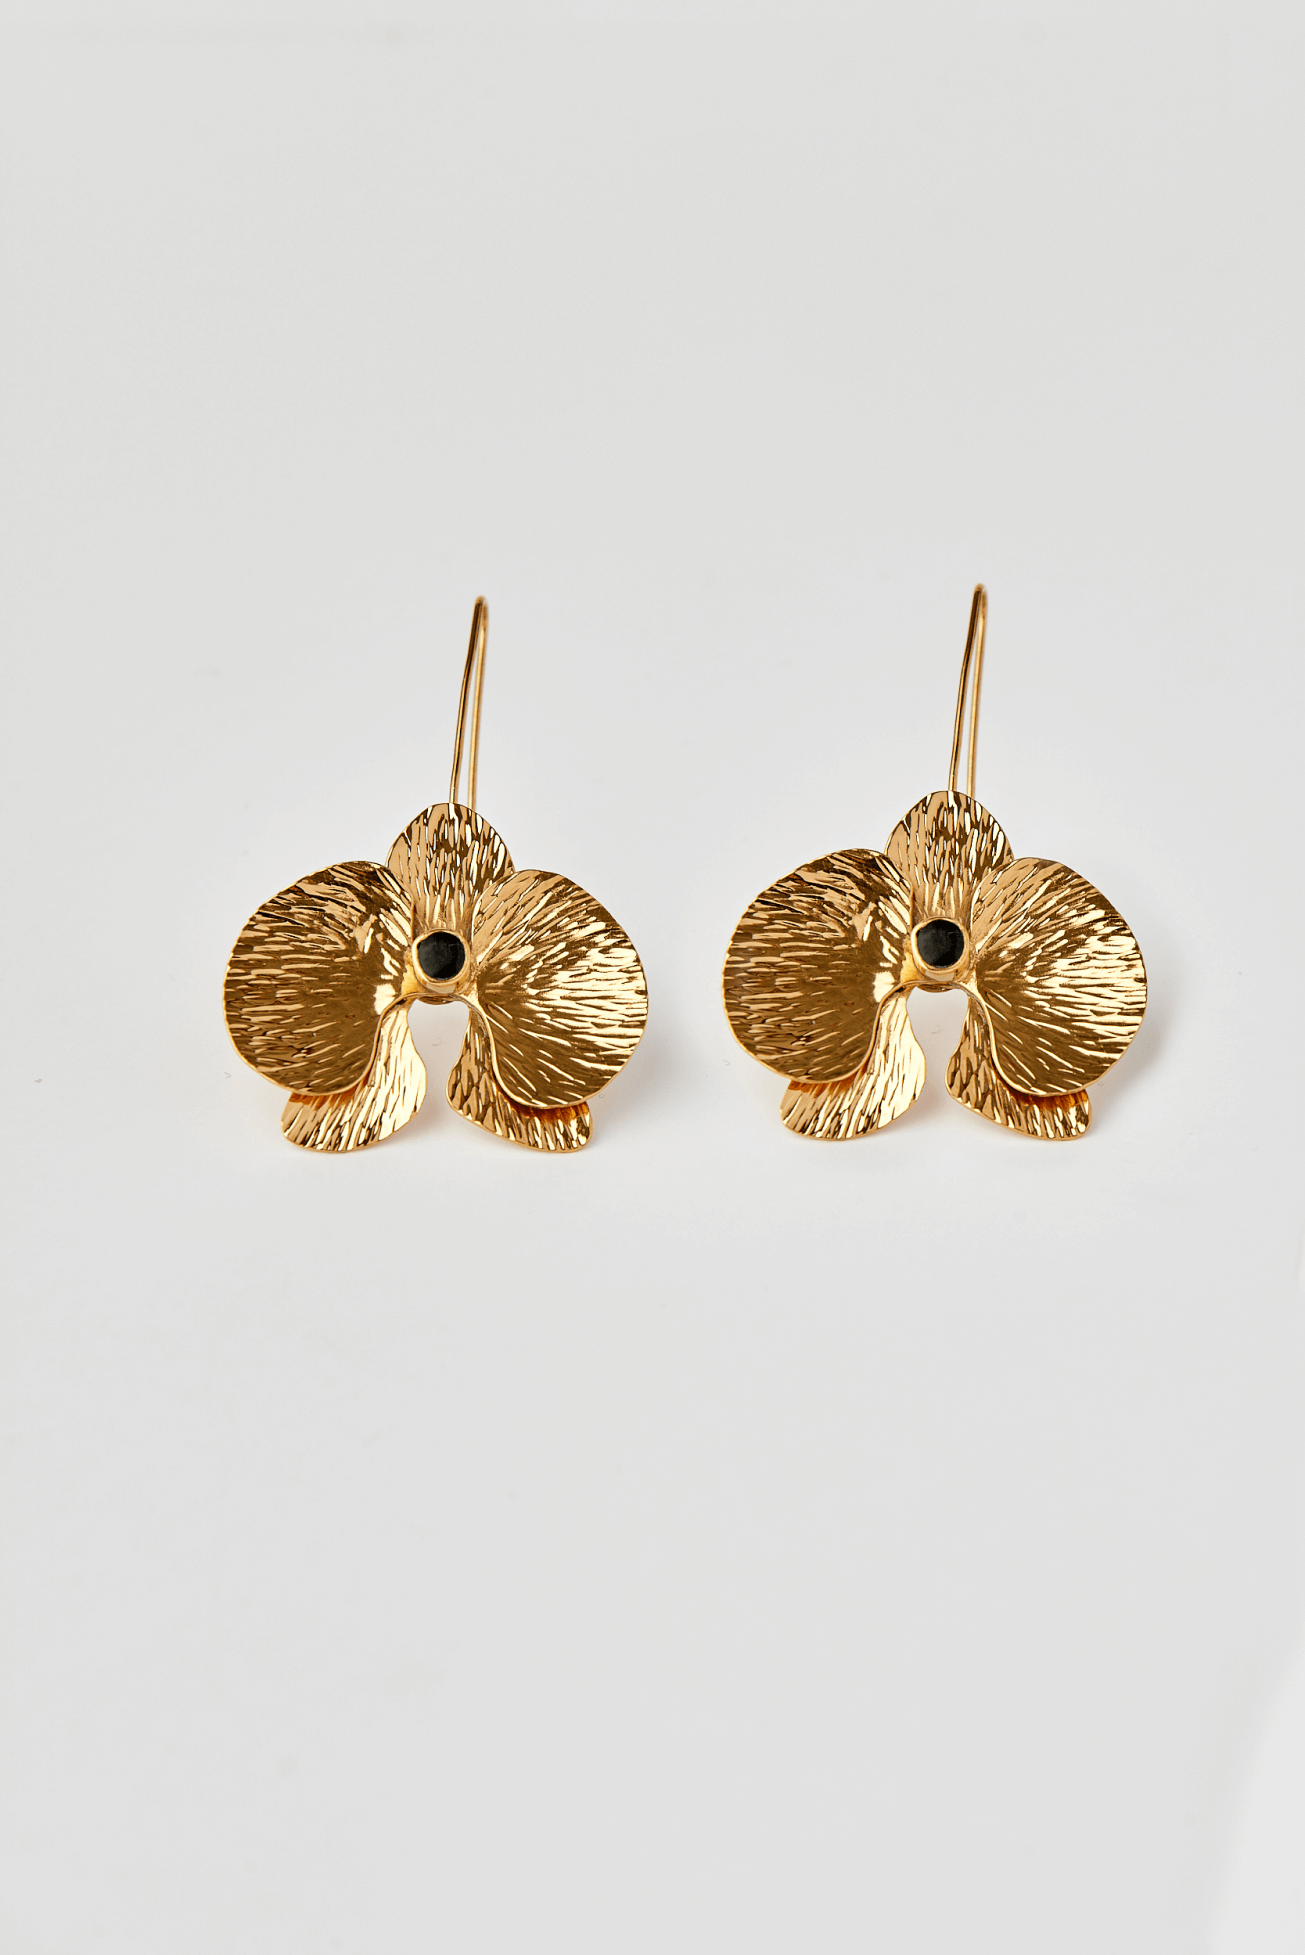 Shop Mini Deviendra Earrings by We Are NBO on Arrai. Discover stylish, affordable clothing, jewelry, handbags and unique handmade pieces from top Kenyan & African fashion brands prioritising sustainability and quality craftsmanship.